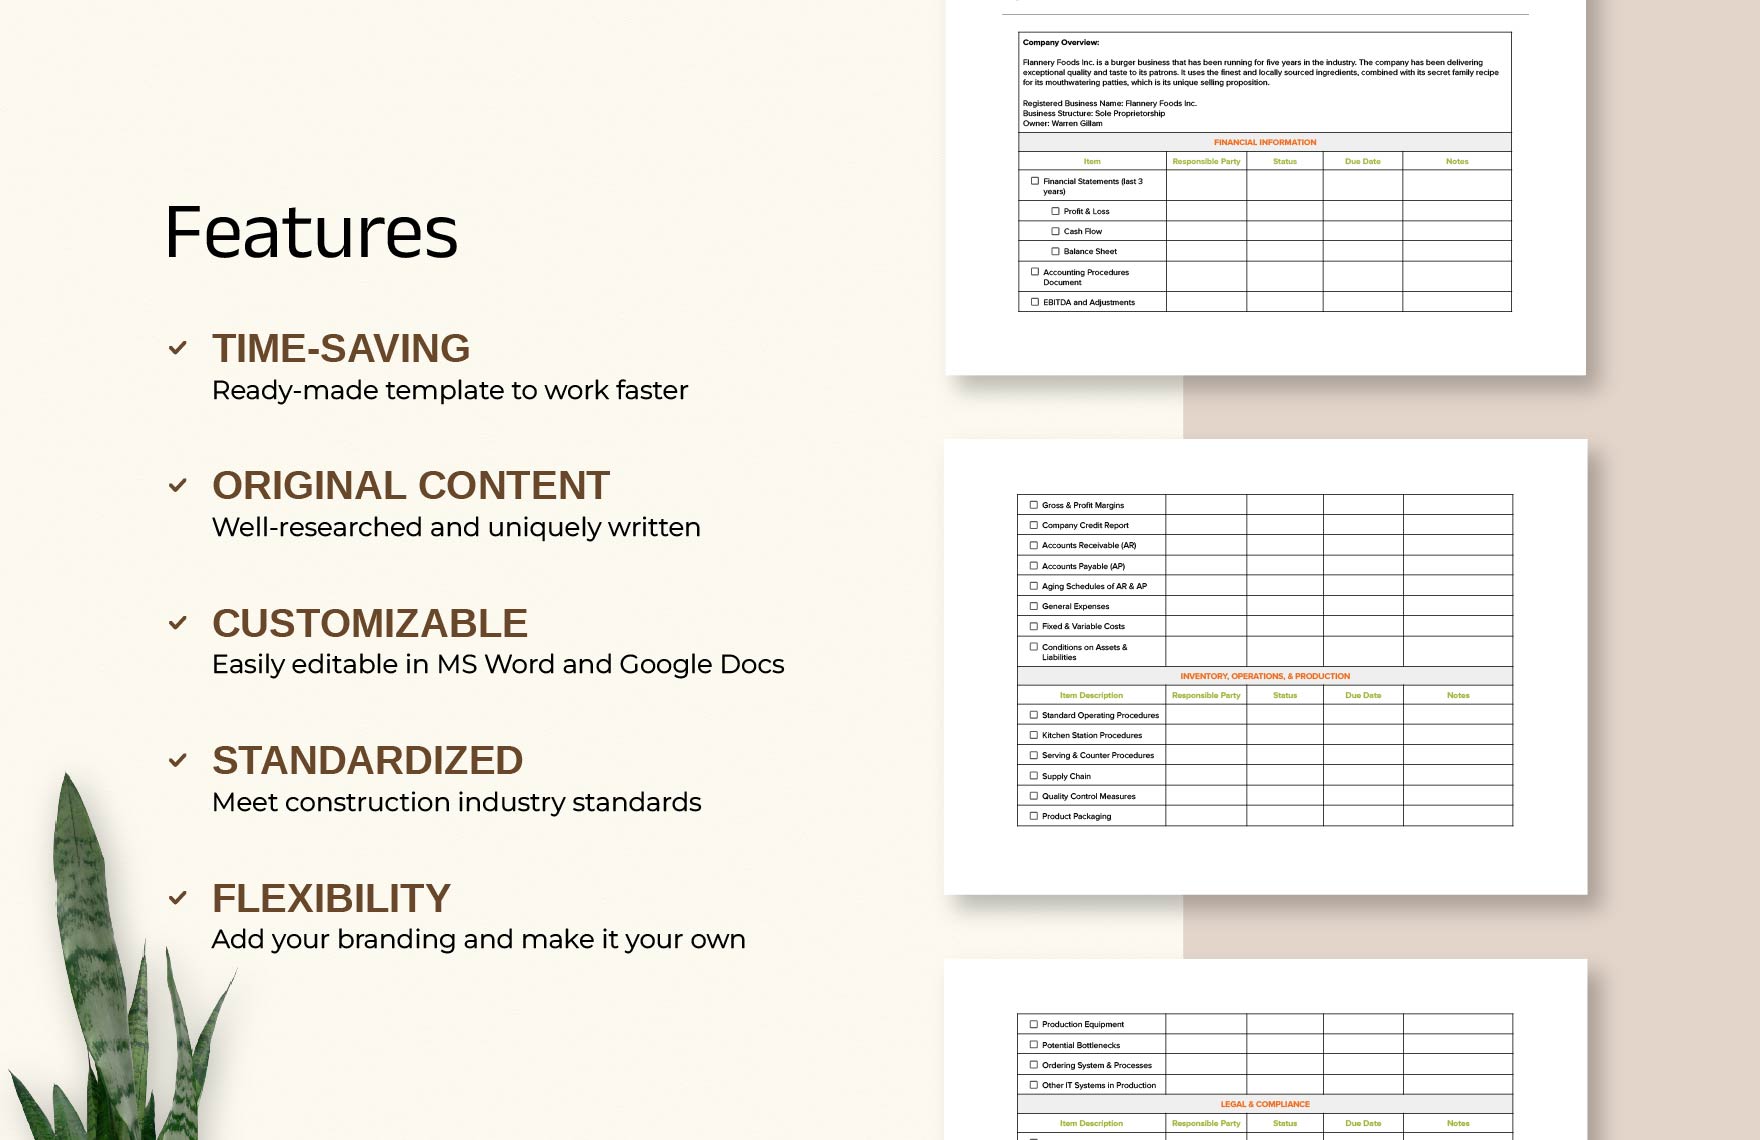 Due Diligence Checklist Template